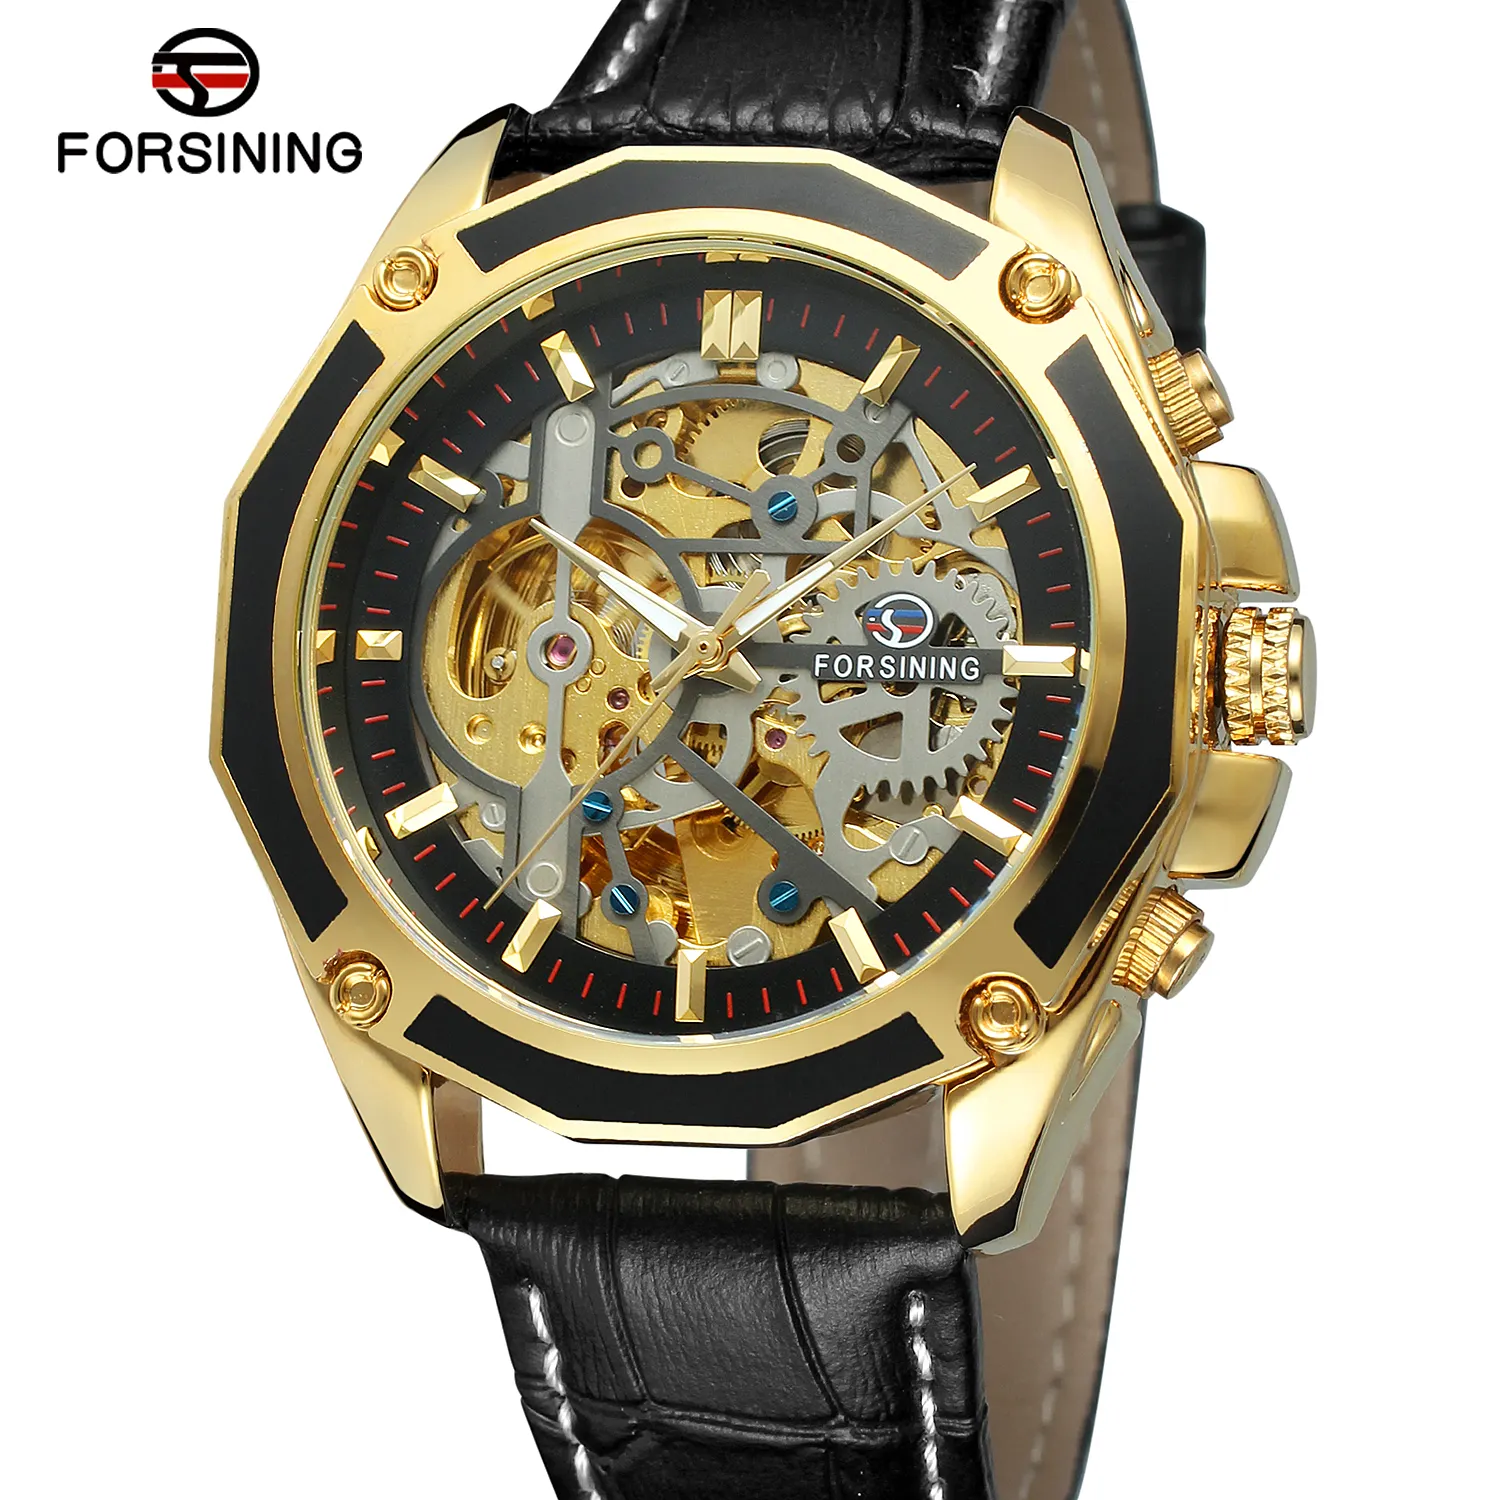 FSG8130 new design golden gents mechanical watch creative steel band water resistant automatic scrolling giant watch set